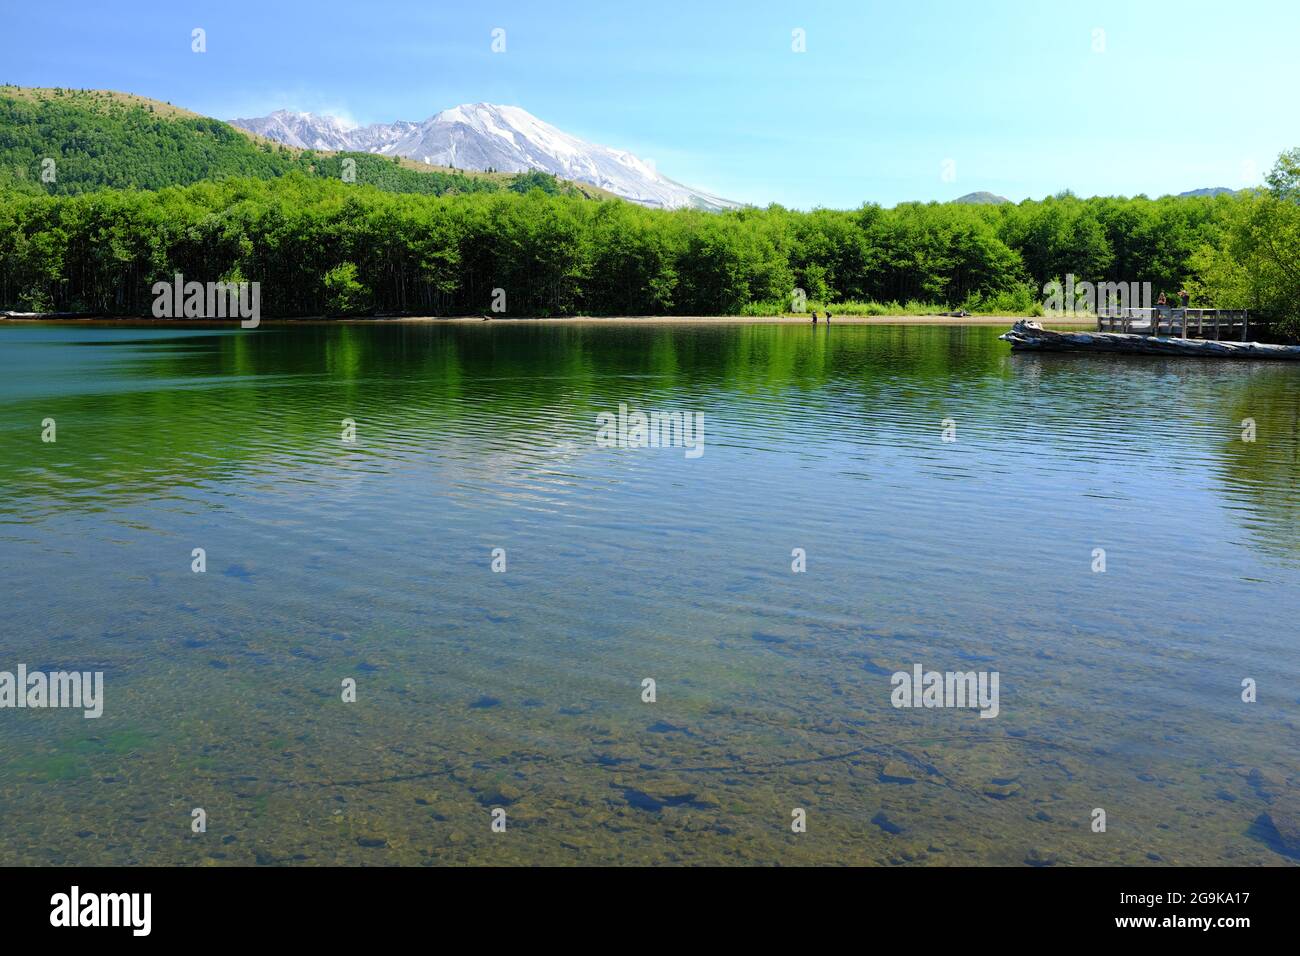 Coldwater Lake with Mt. St. Helens in the background in Washington State, USA. Stock Photo